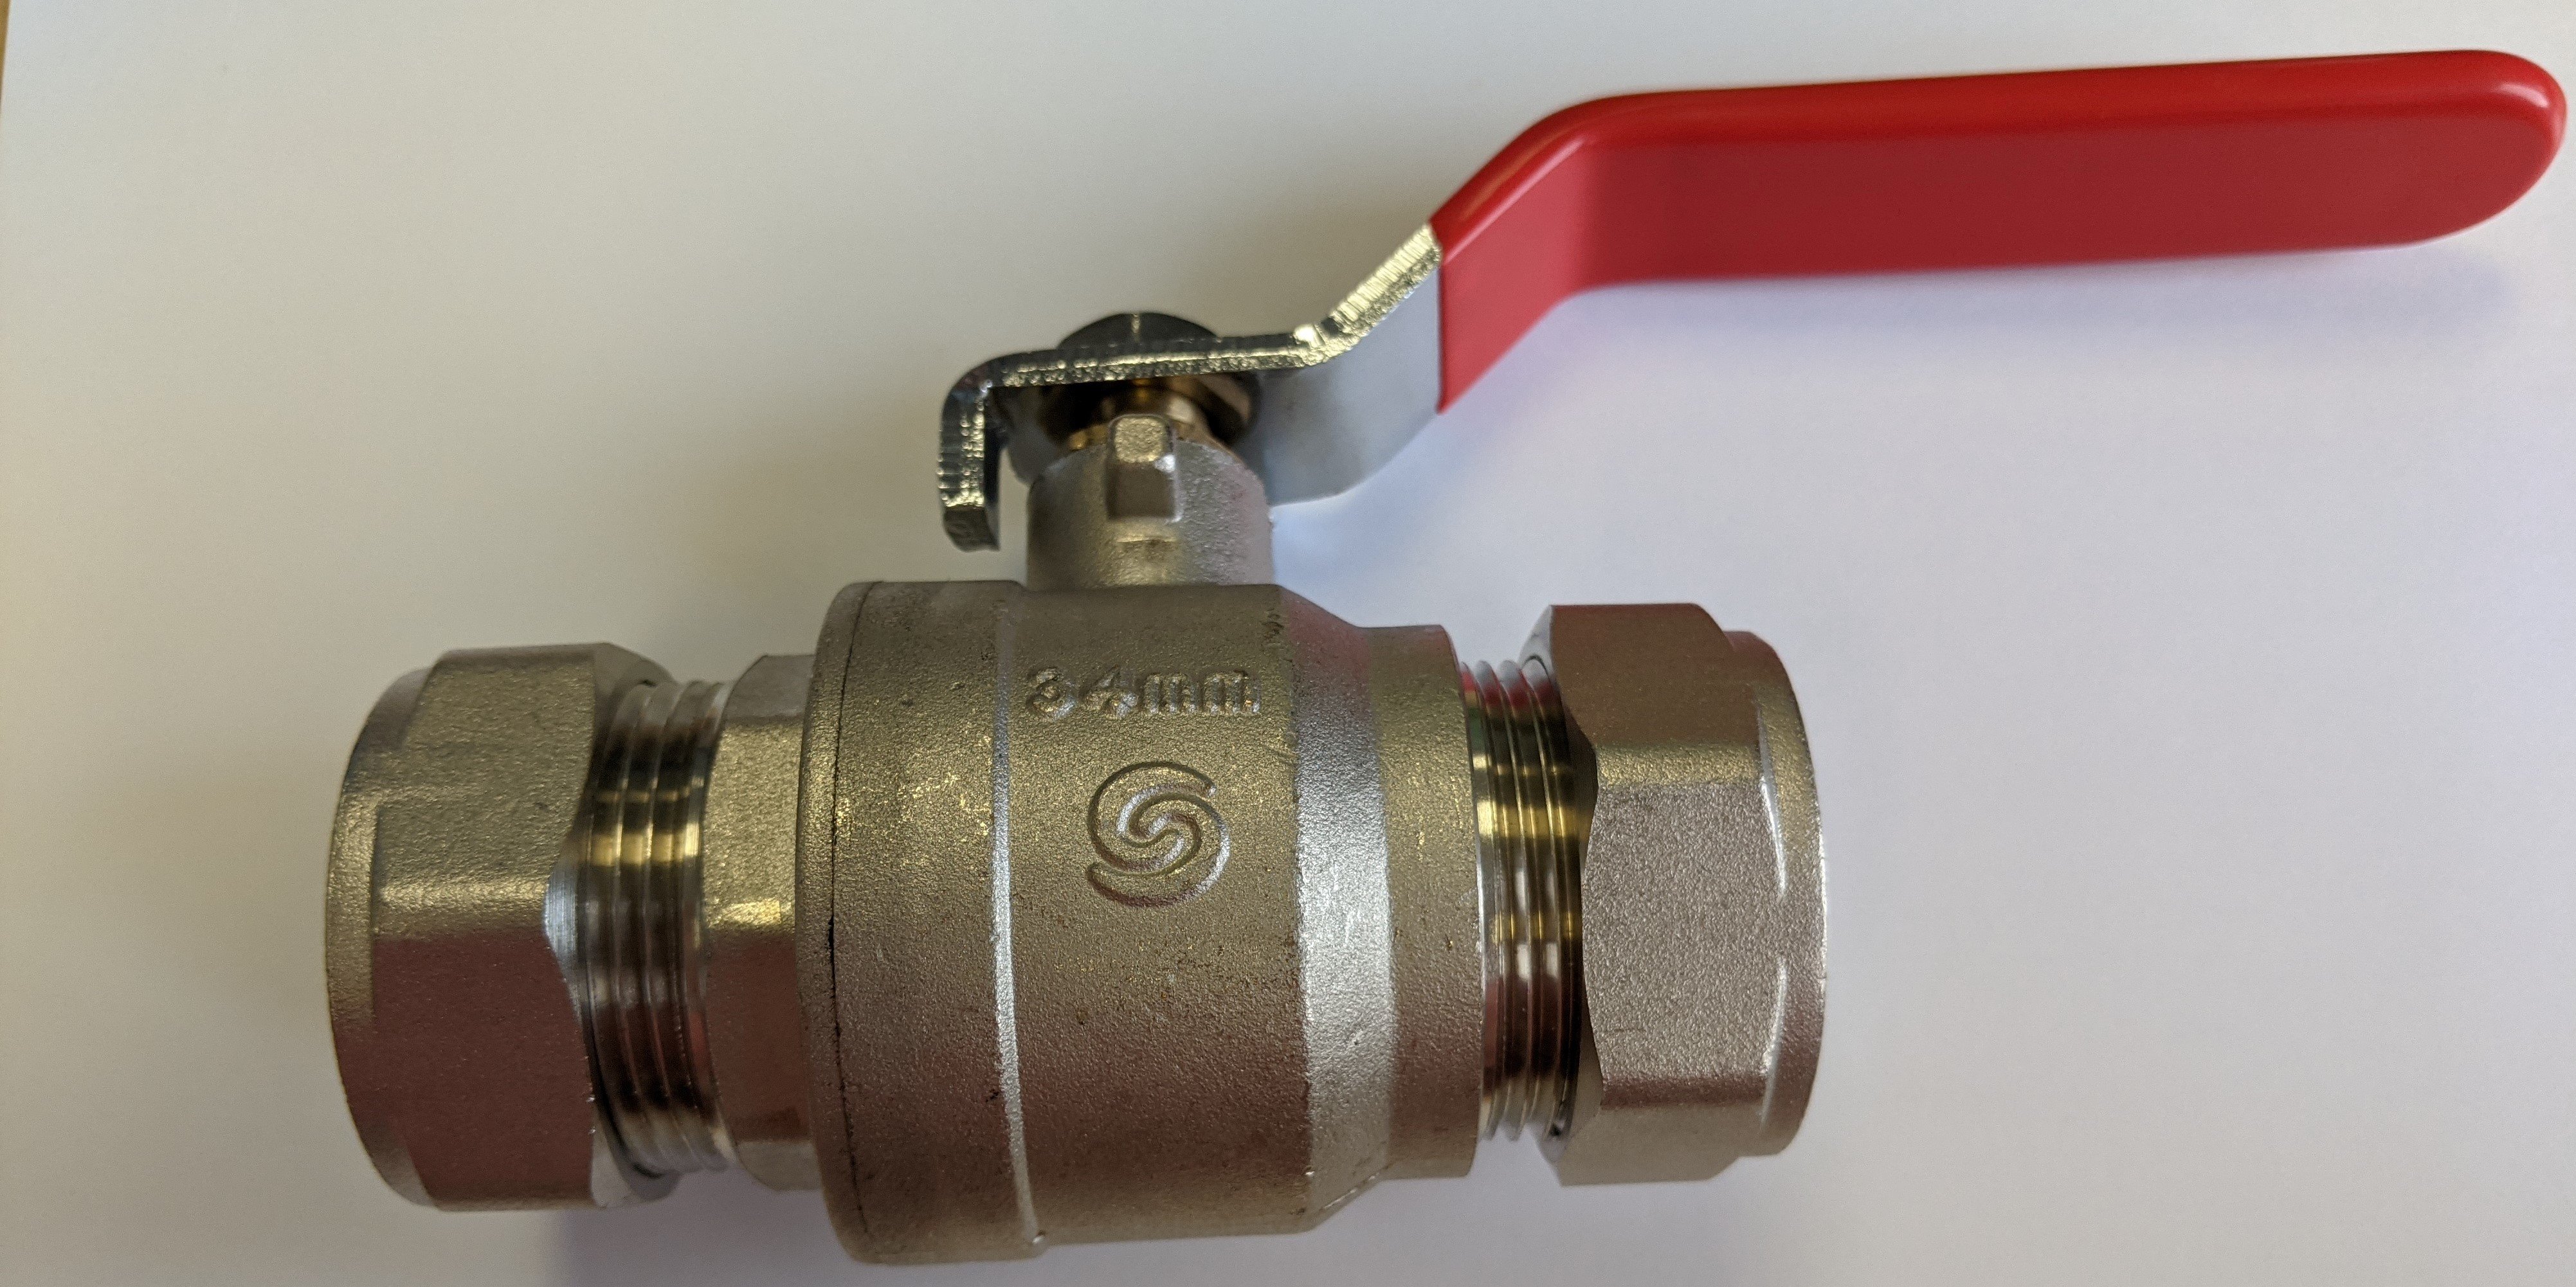 28mm 22mm 15mm Compresion Ball Lever Valves TG Lynes Wras Aproved 32mm 